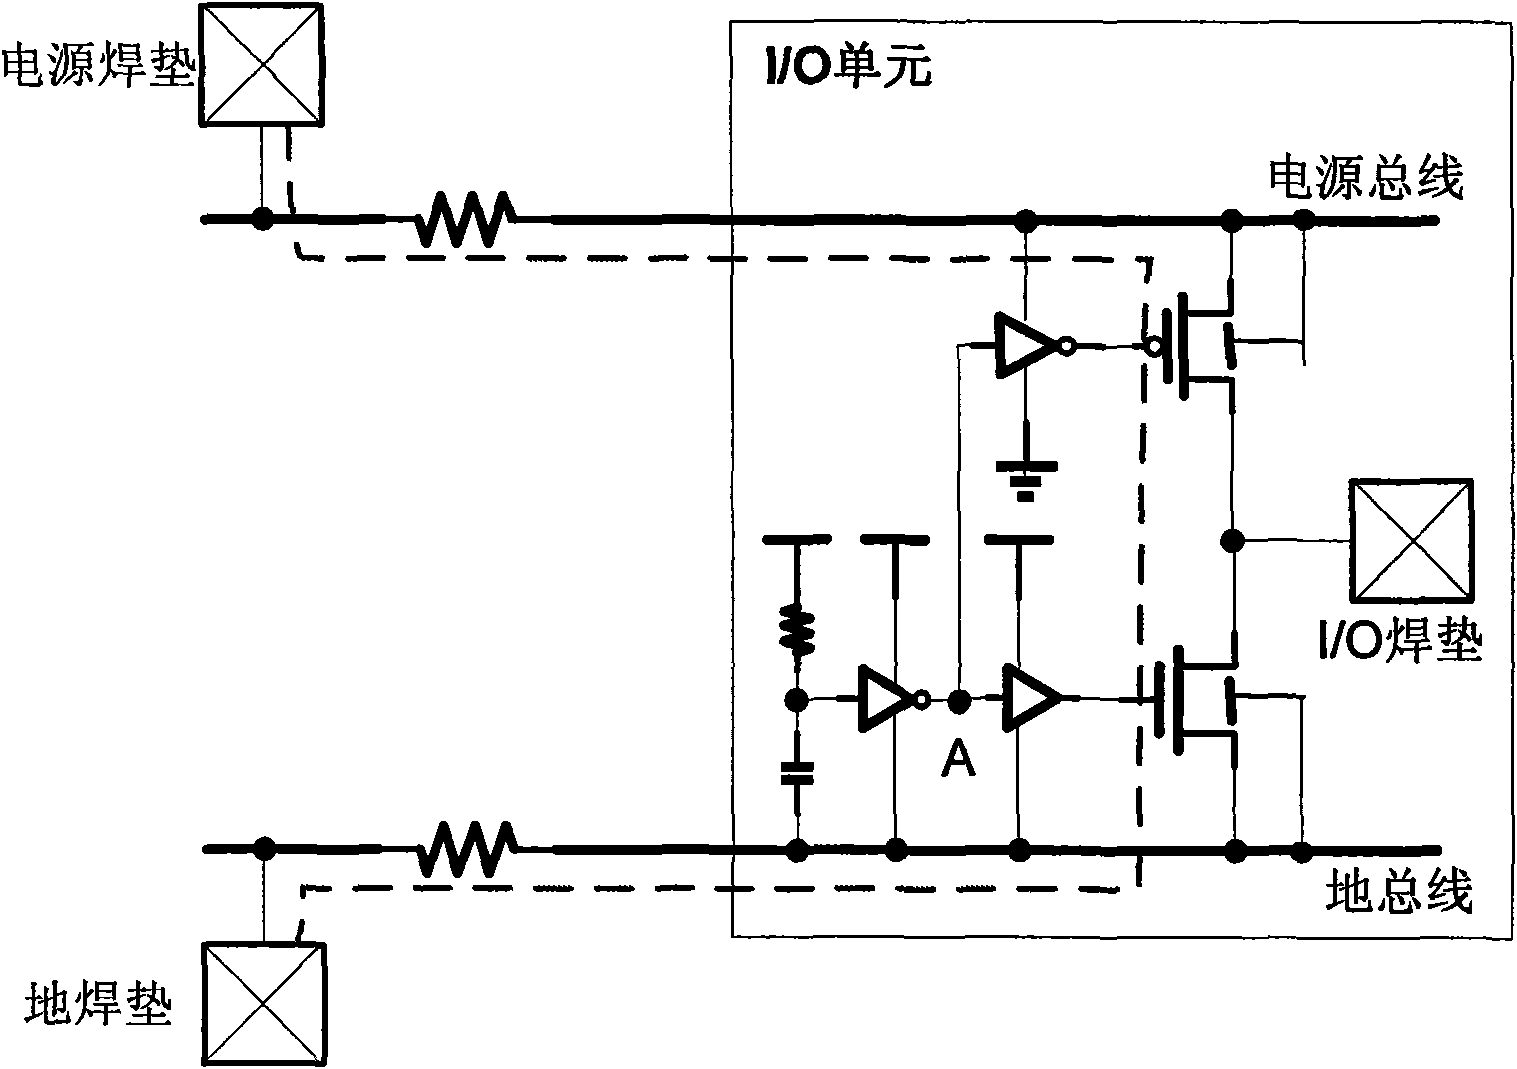 Power clamping static protection circuit